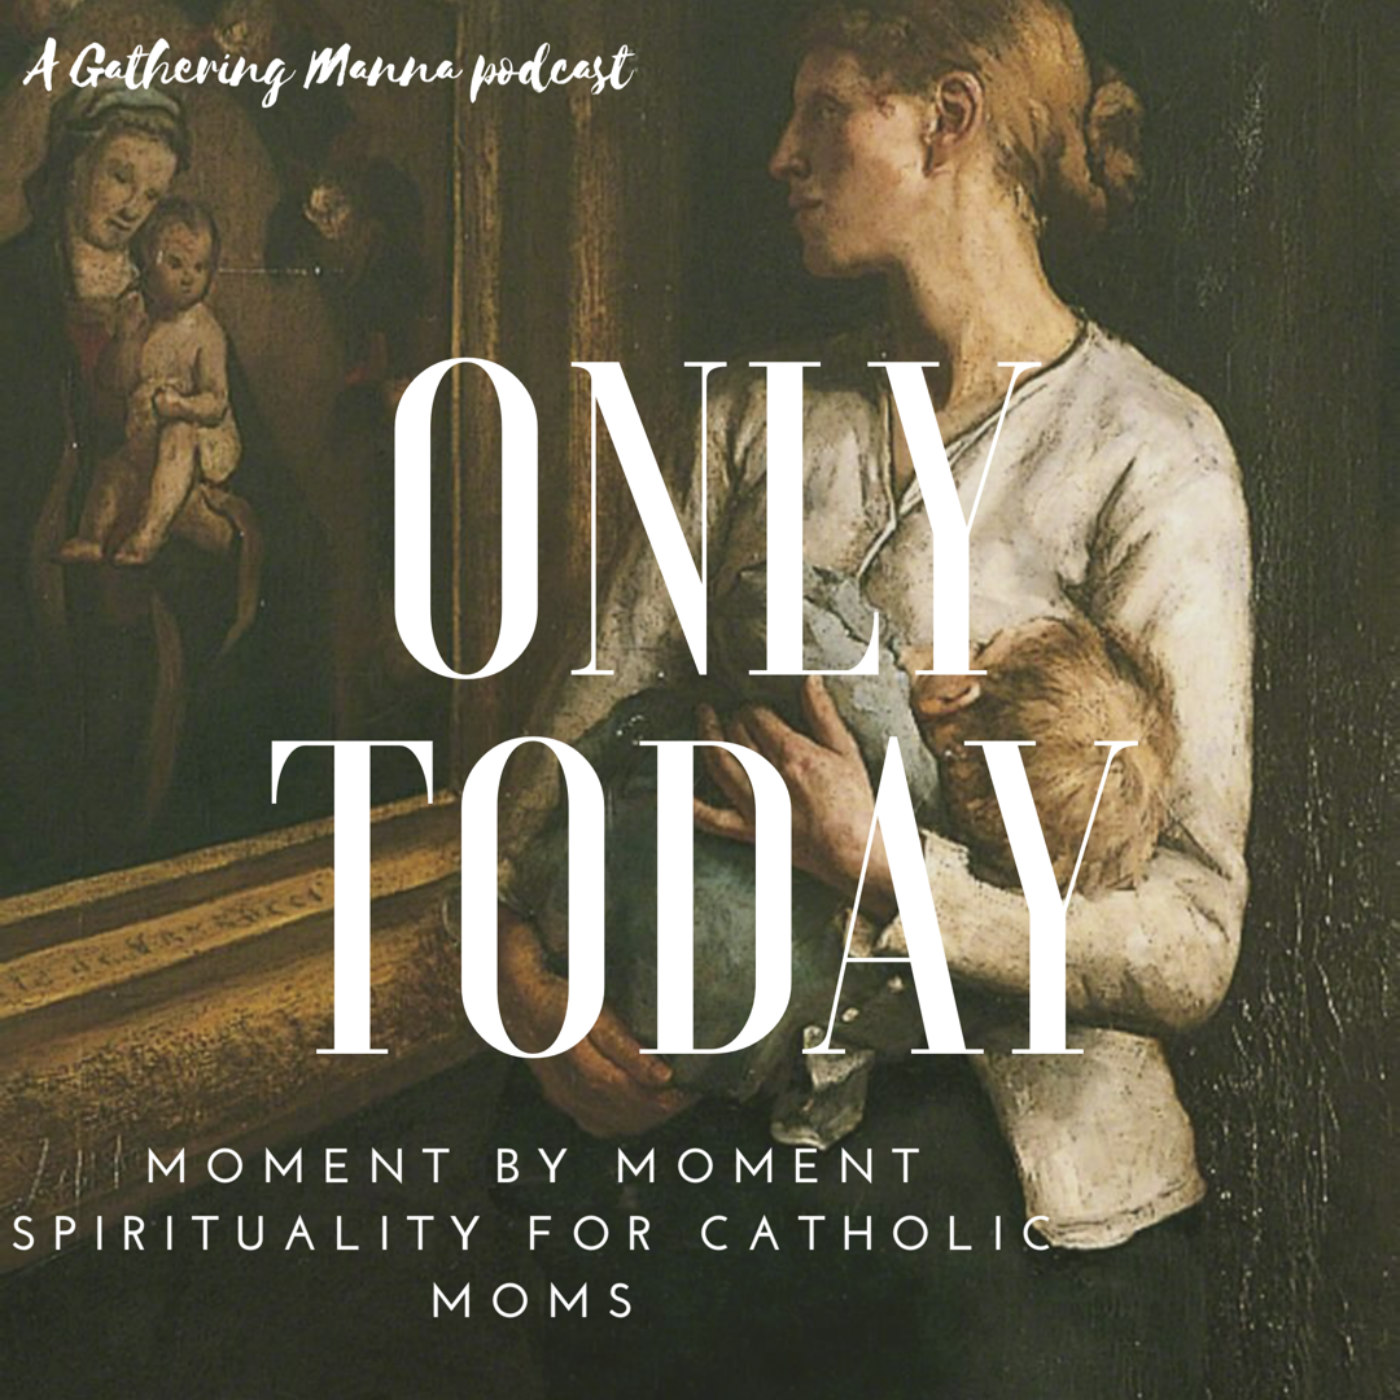 Table for One: Spiritual Loneliness in Marriage